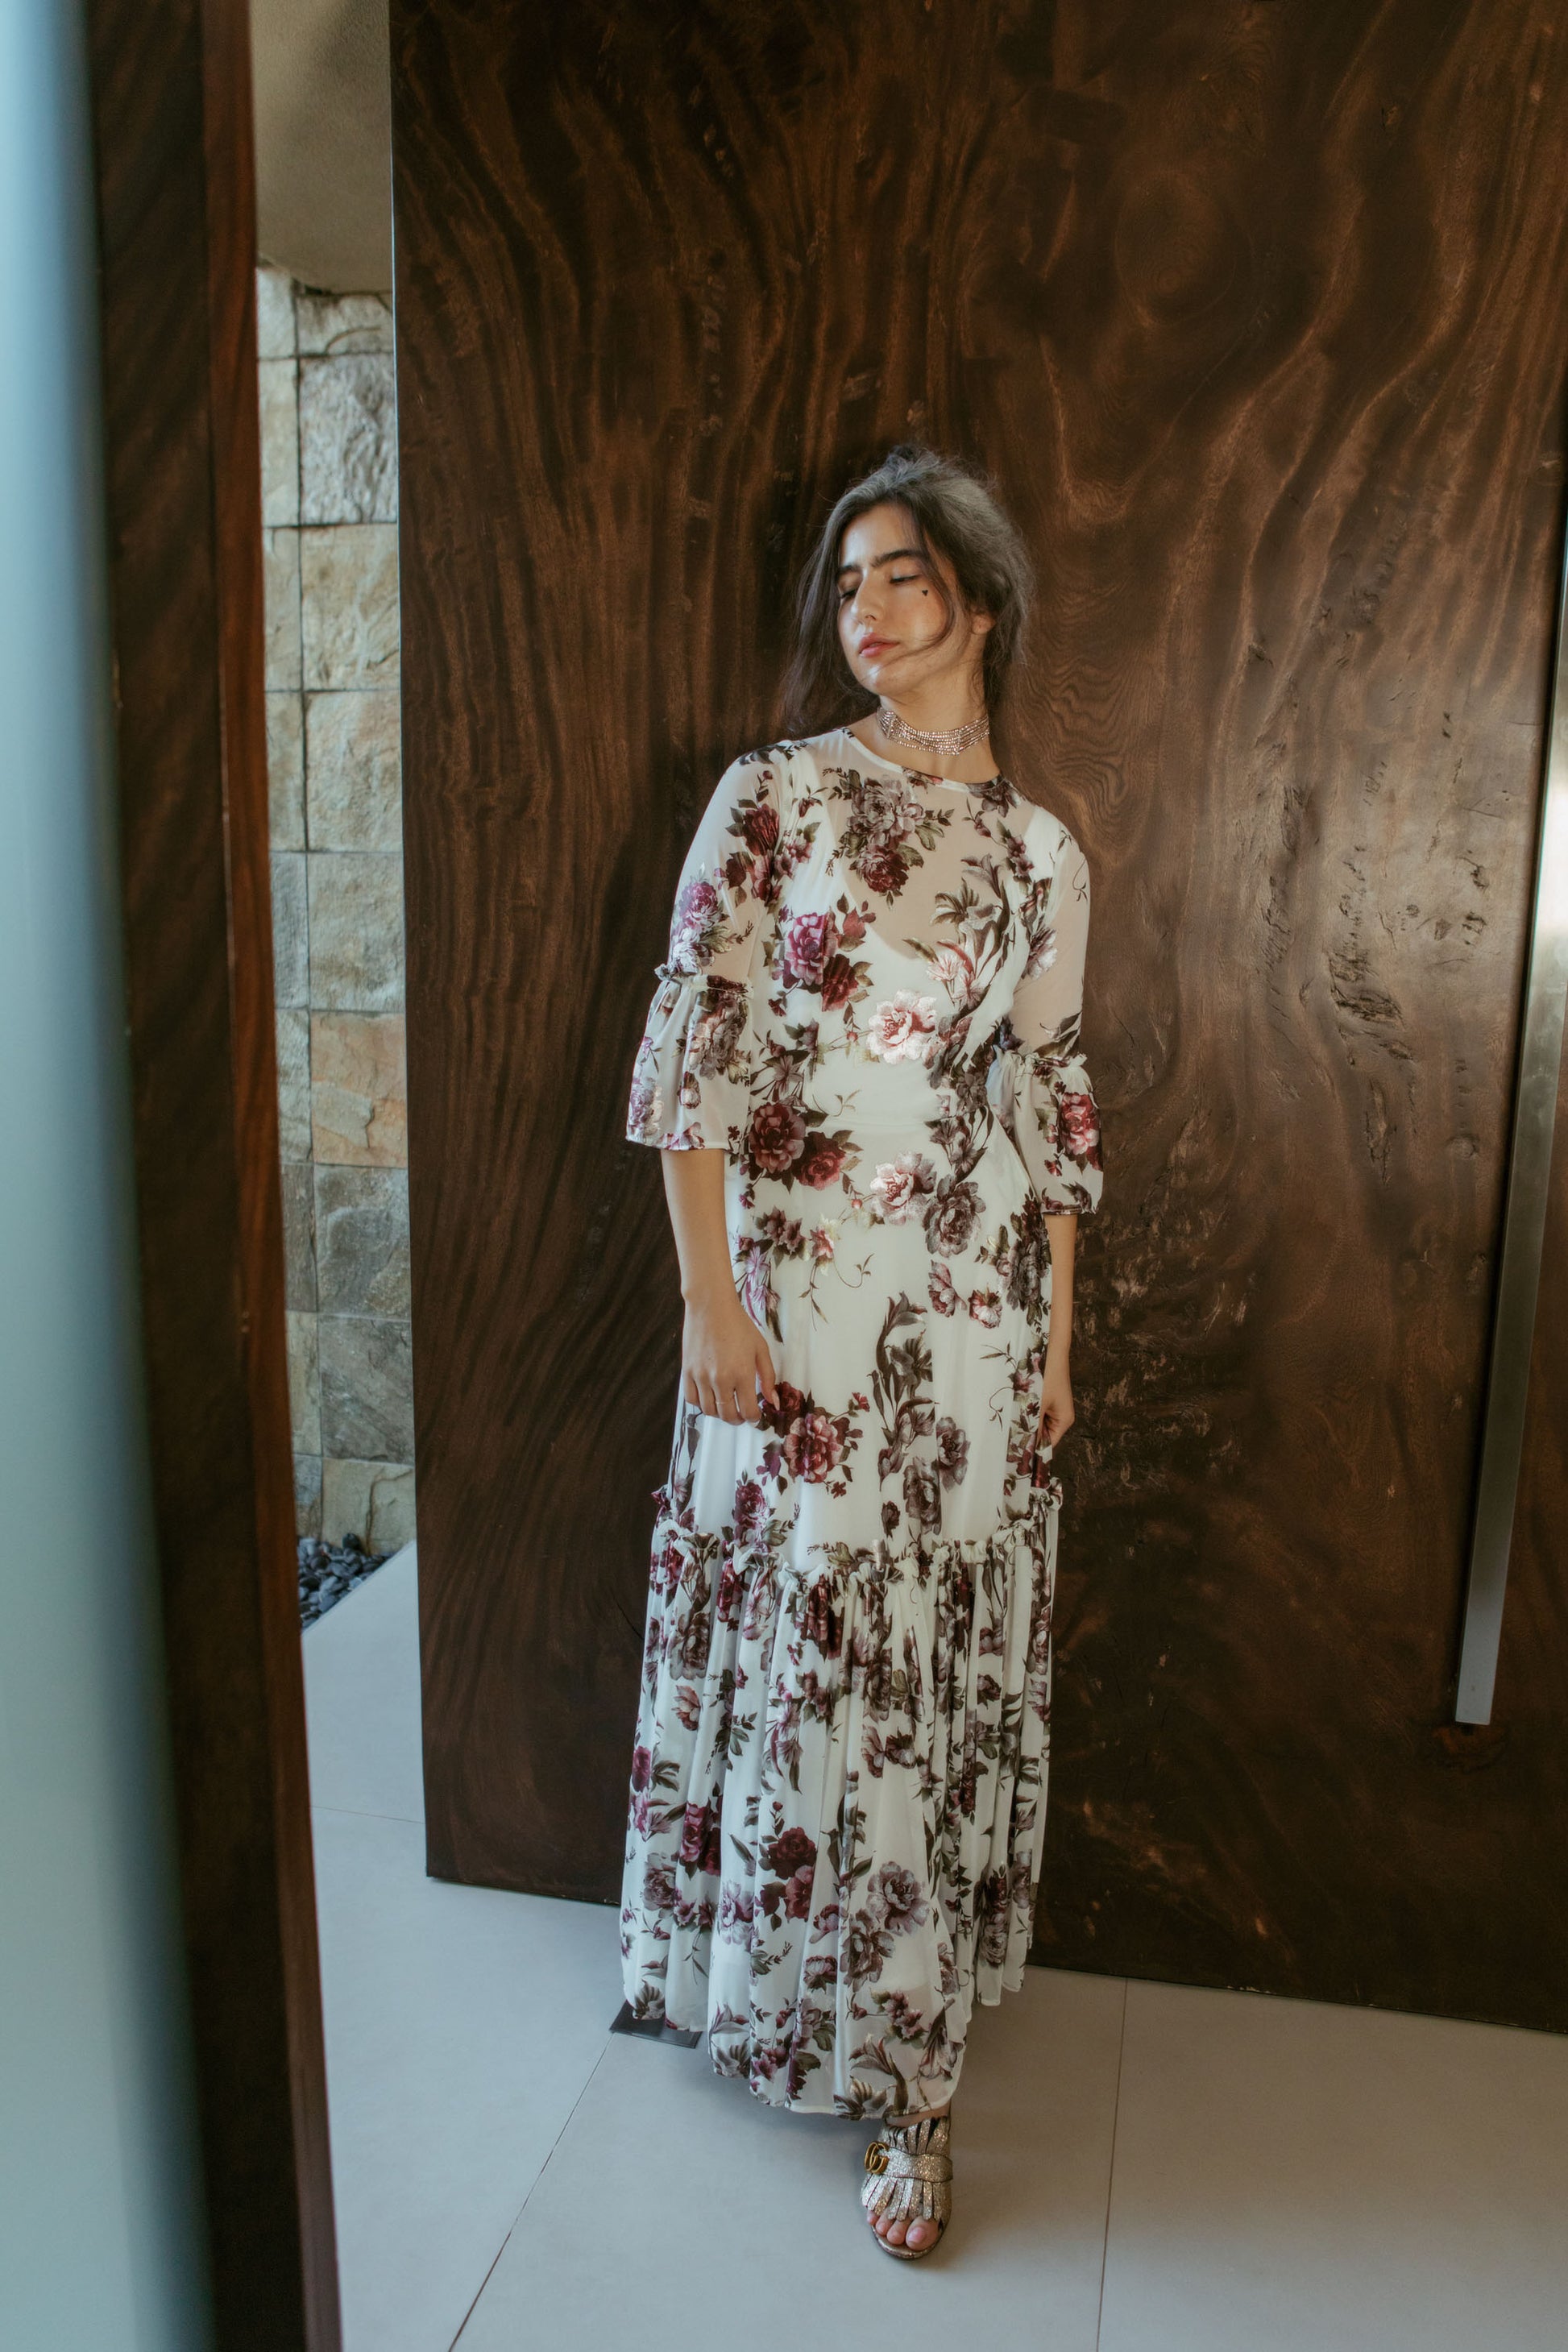 An airy ruffled maxi dress. Made with an airy and metallic detail floral mesh fabric featuring pockets, mid-length bell sleeves, and a full, single-tiered skirt with ankle hem. Includes a matching slip dress that can be worn on its own.